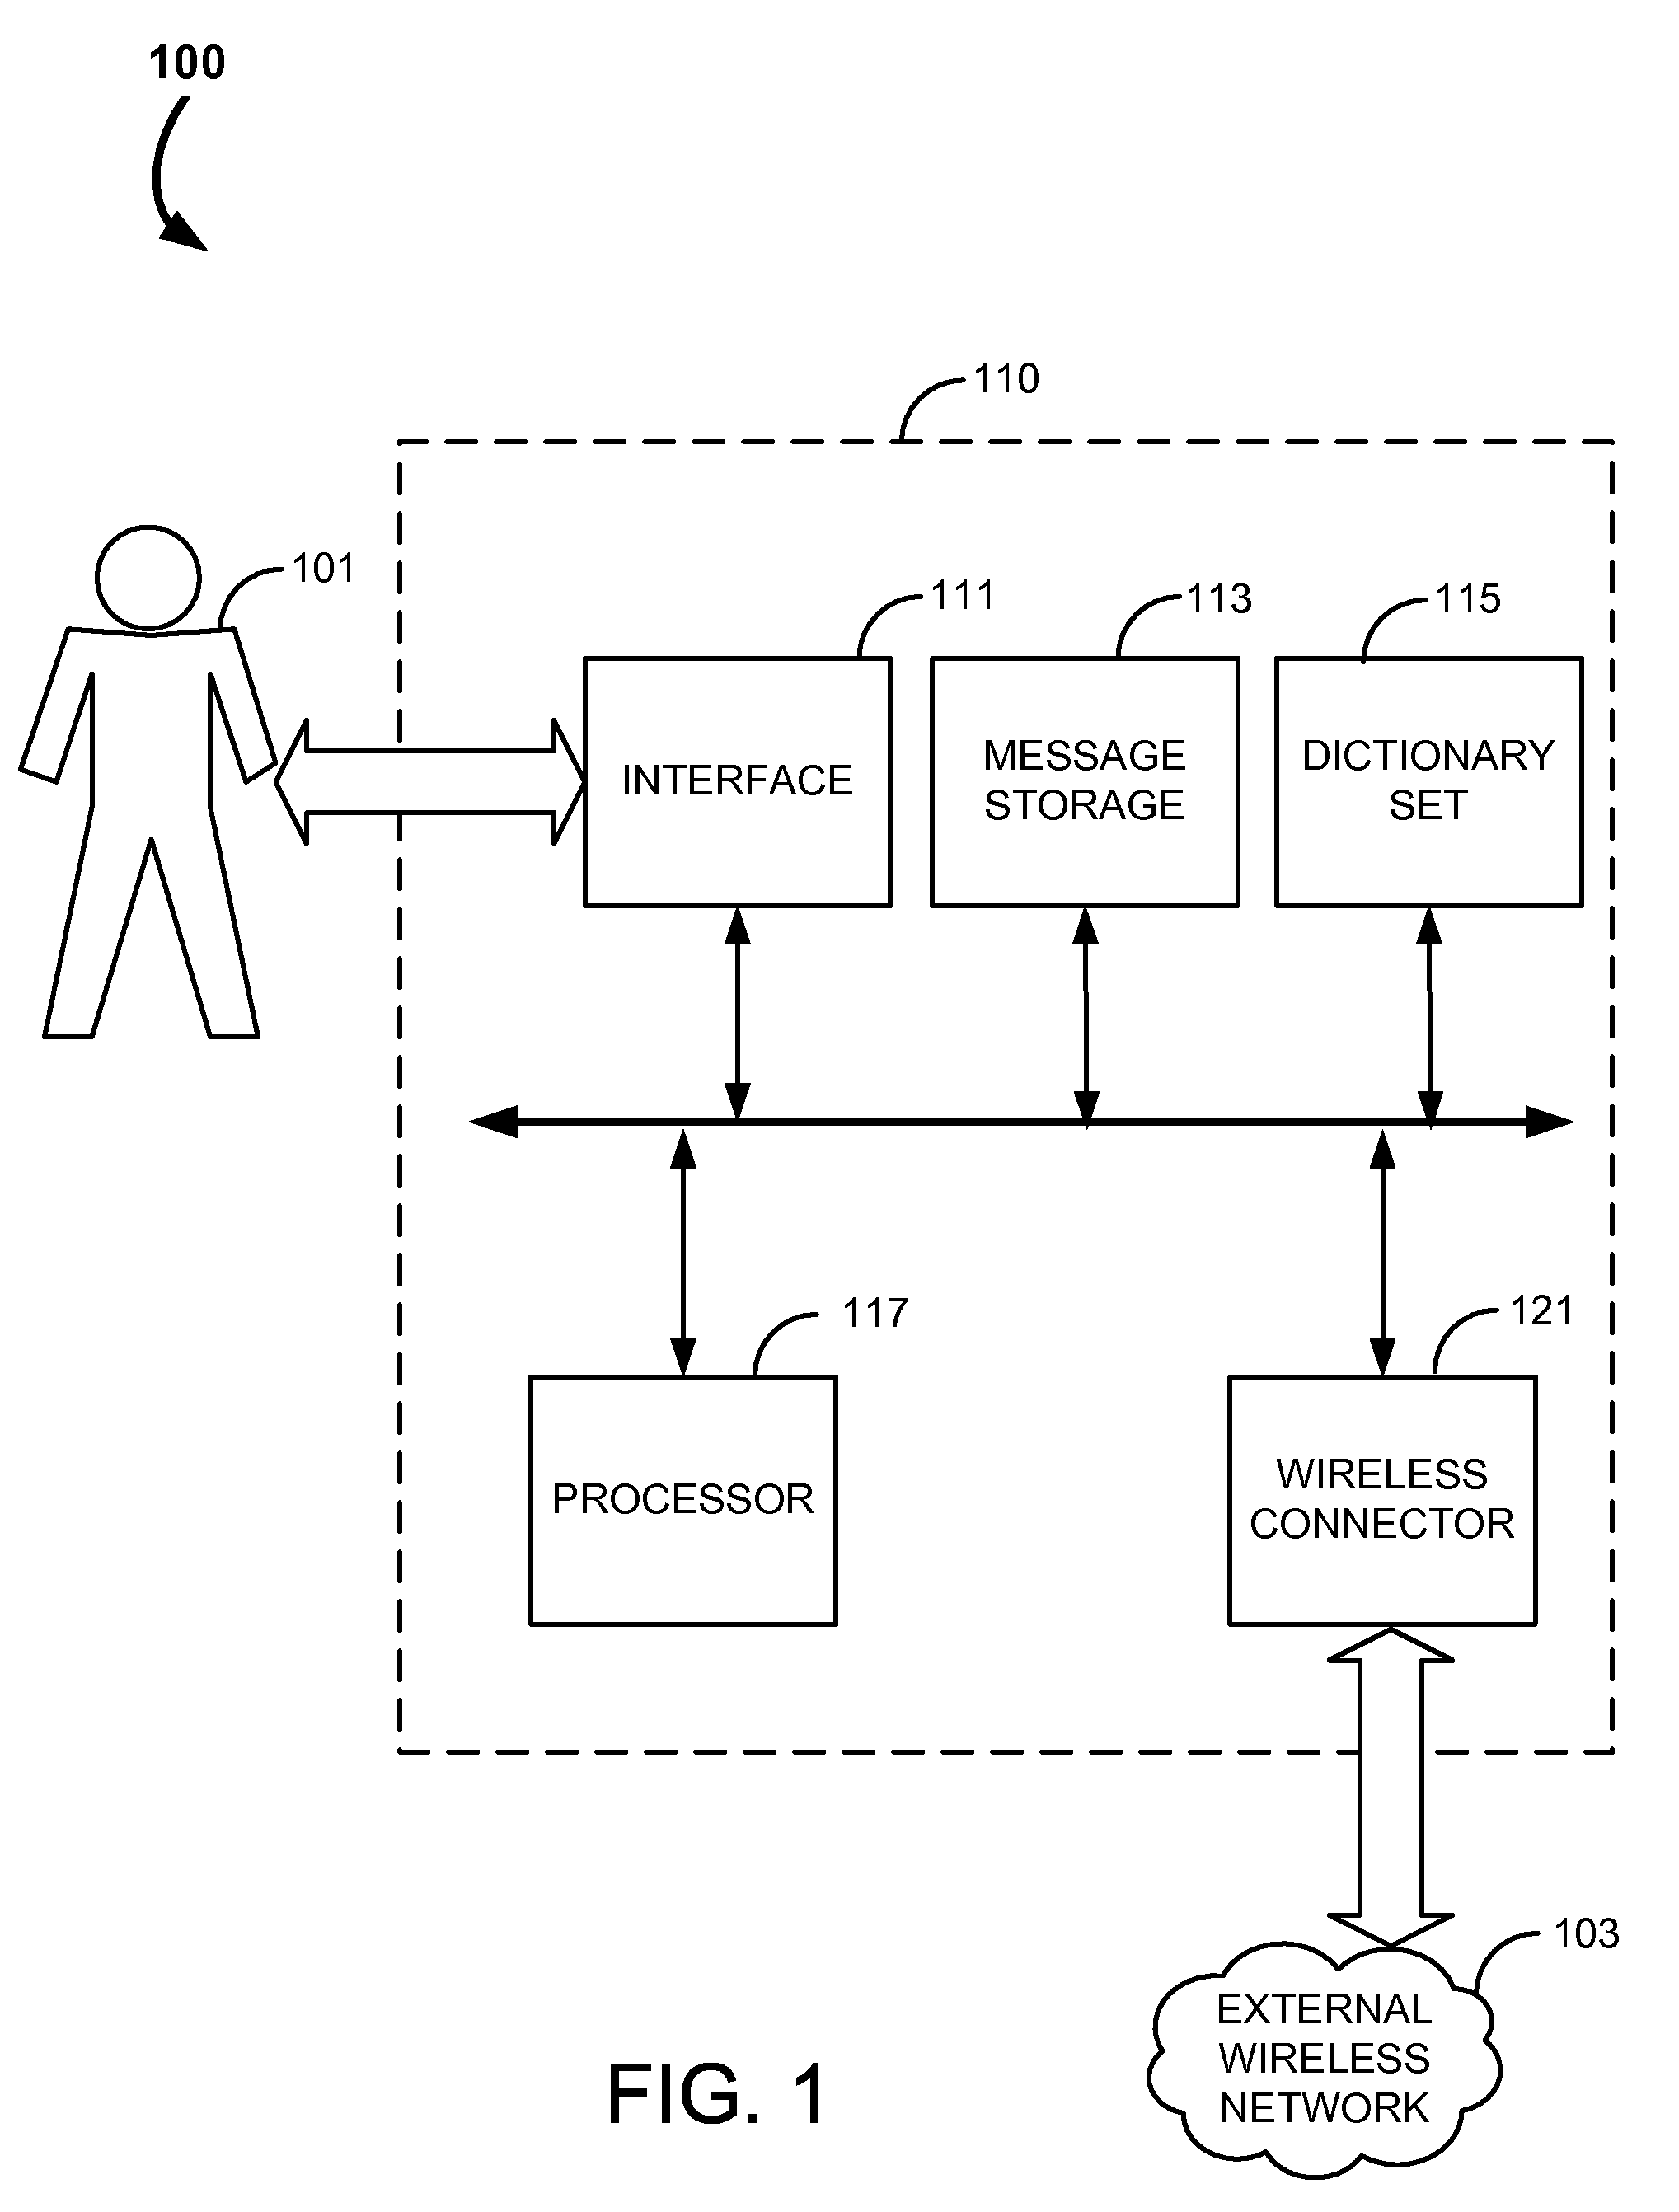 Systems and methods for an automated personalized dictionary generator for portable devices